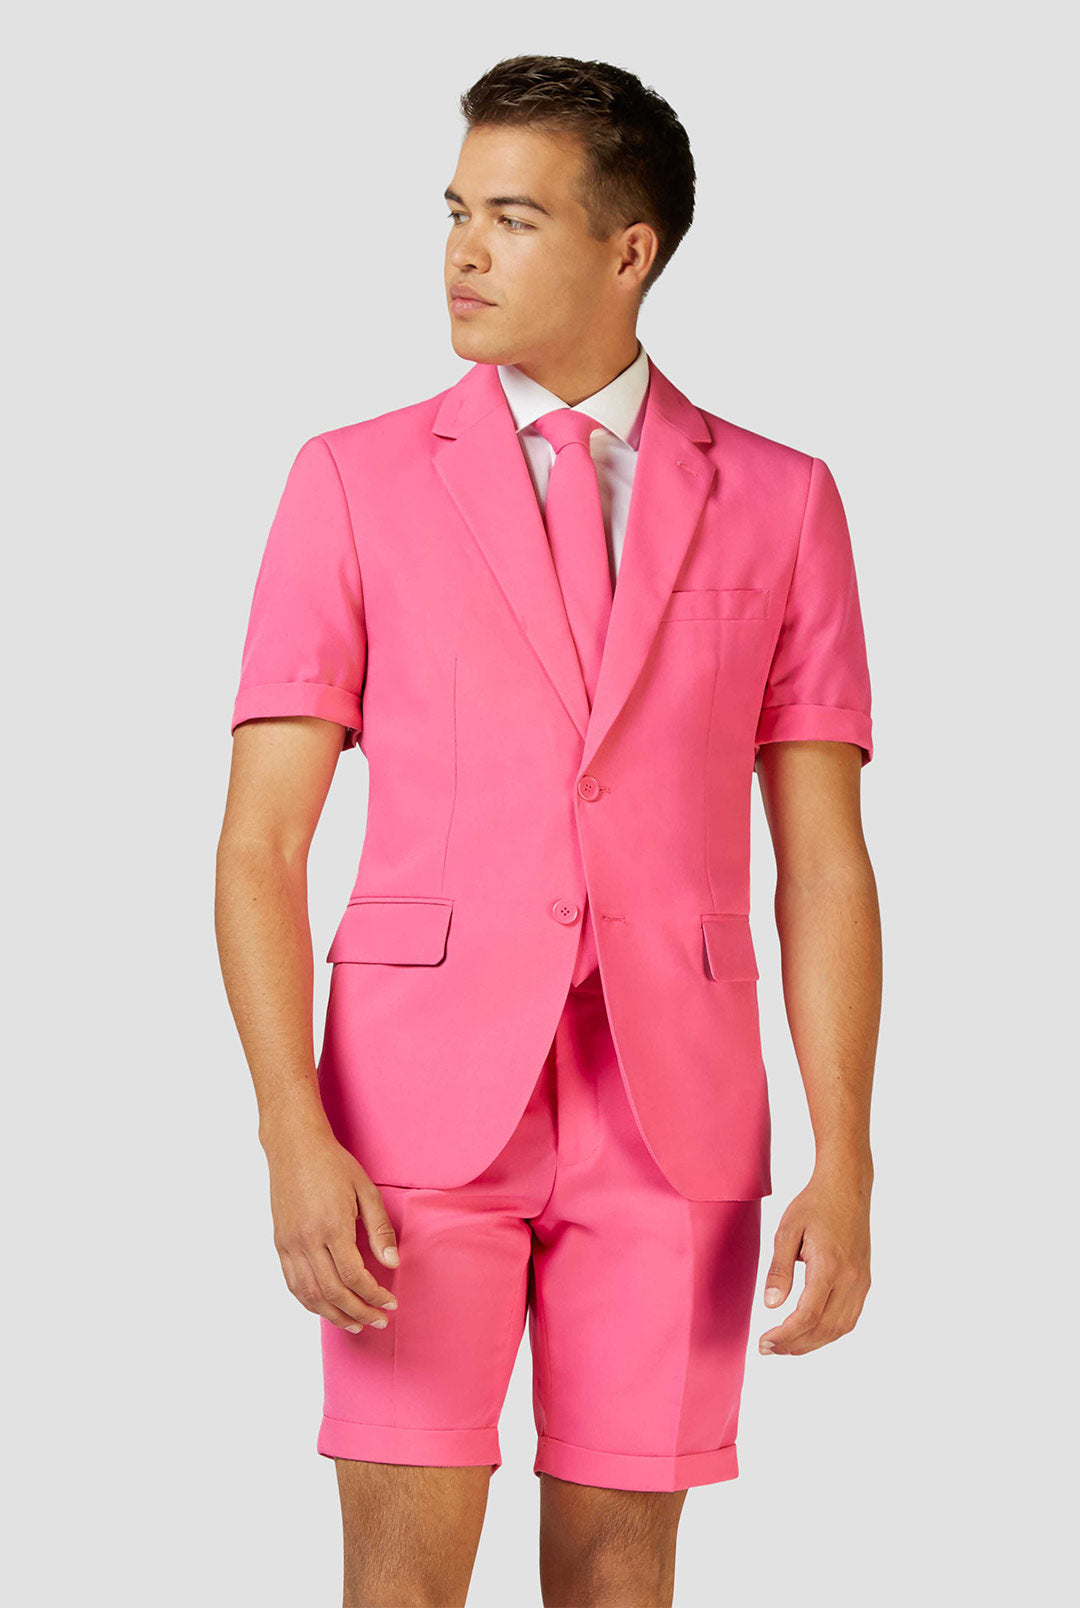 Hot Pink Power Suit - Shay Moné